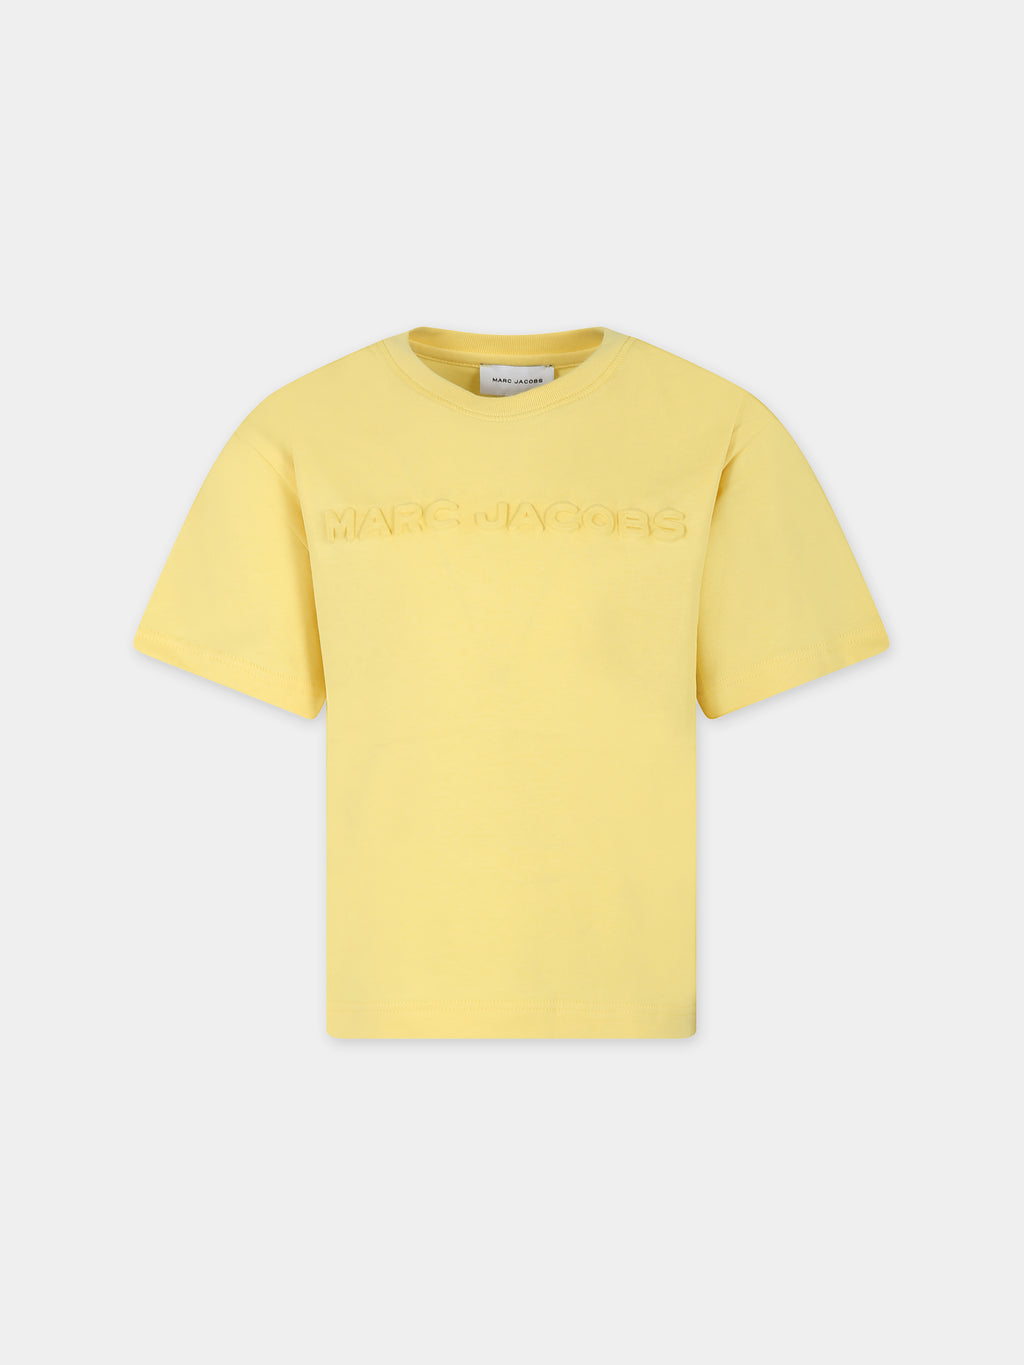 Yellow t-shirt for kids with logo